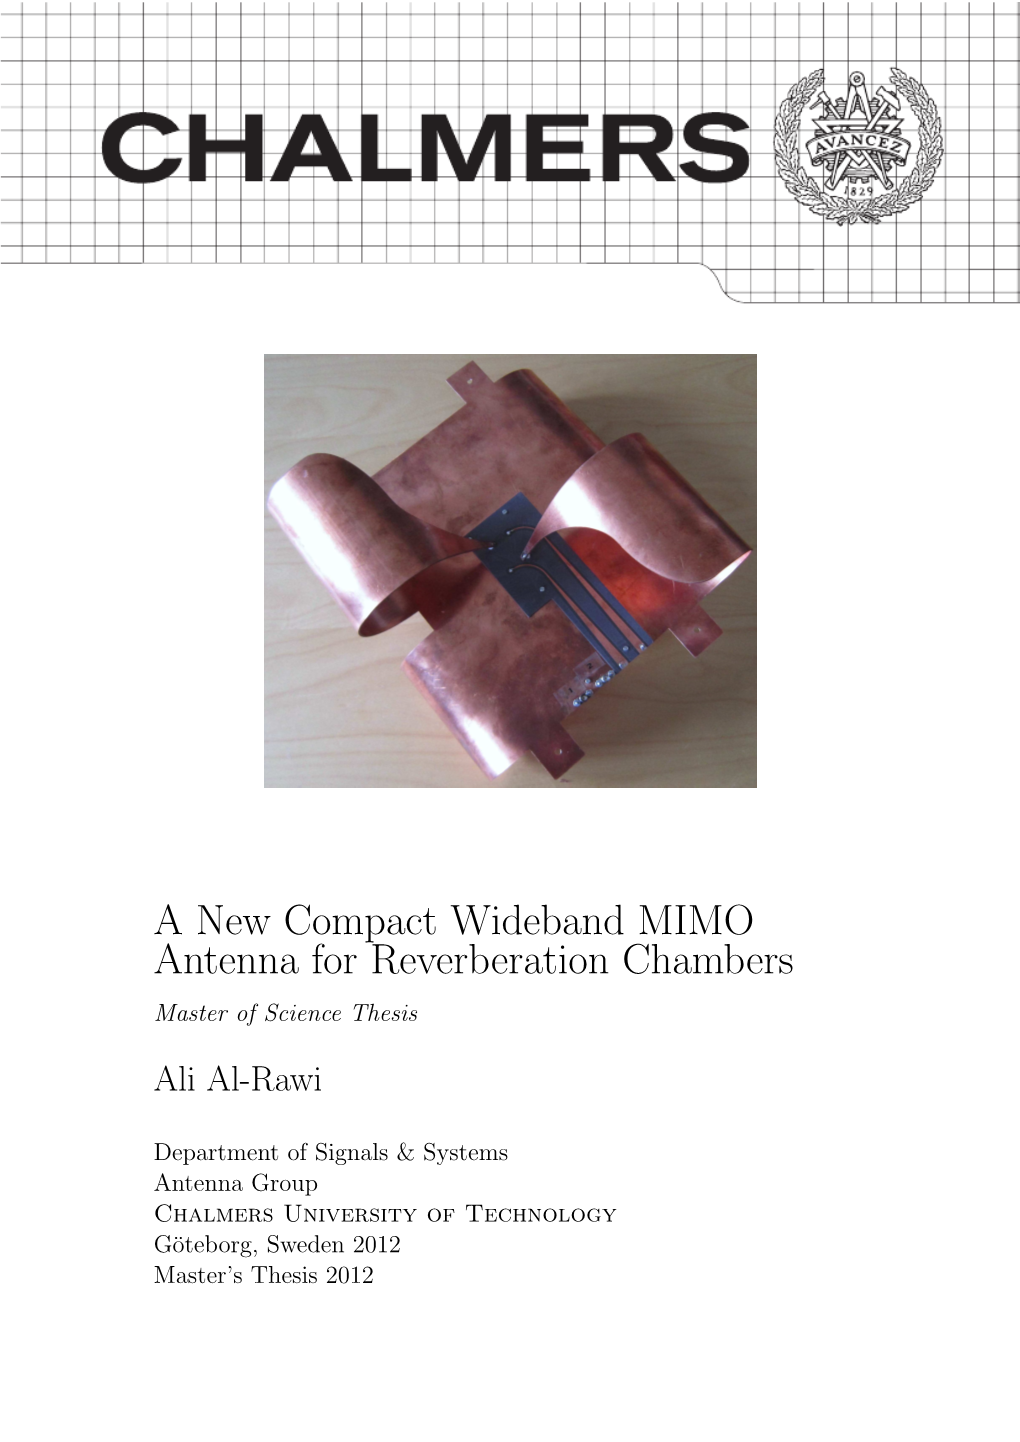 A New Compact Wideband MIMO Antenna for Reverberation Chambers Master of Science Thesis